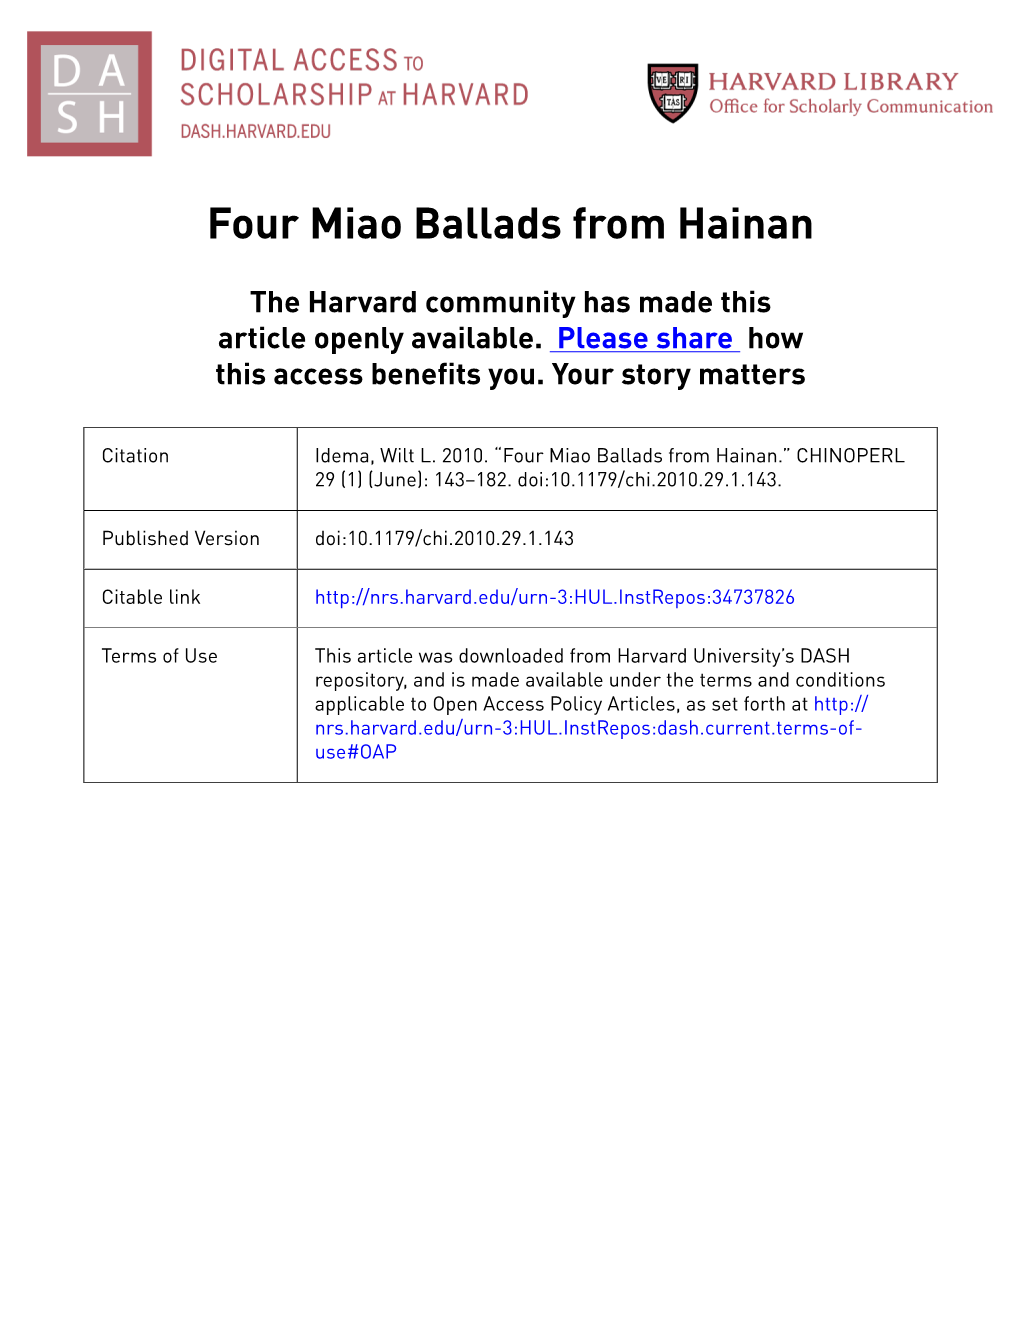 Four Miao Ballads from Hainan